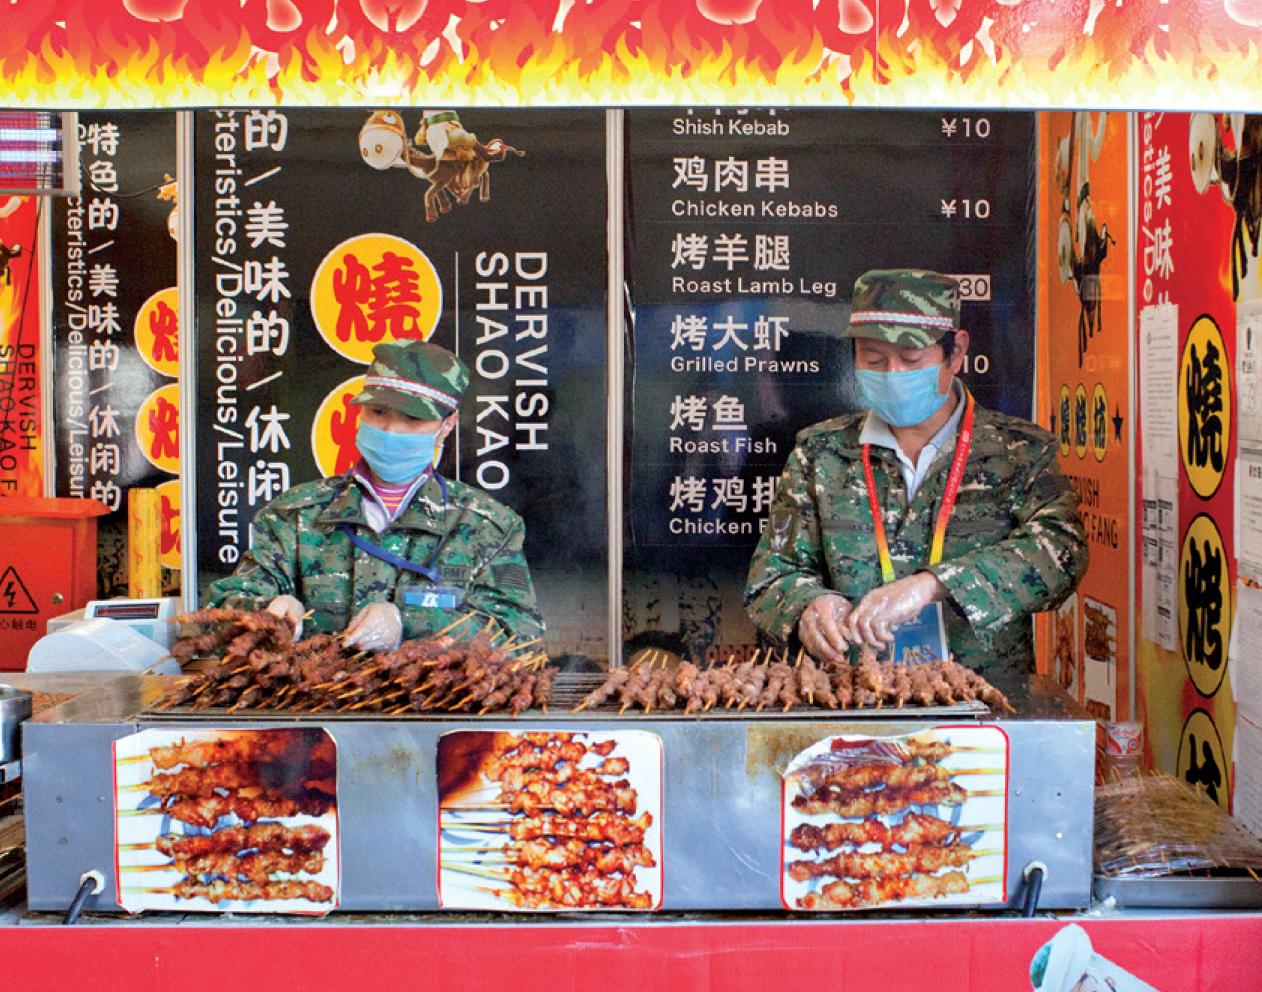 Chinese Fast Food 17 - Contemporary Street Photography - Orange Color Photograph by Anja Hitzenberger